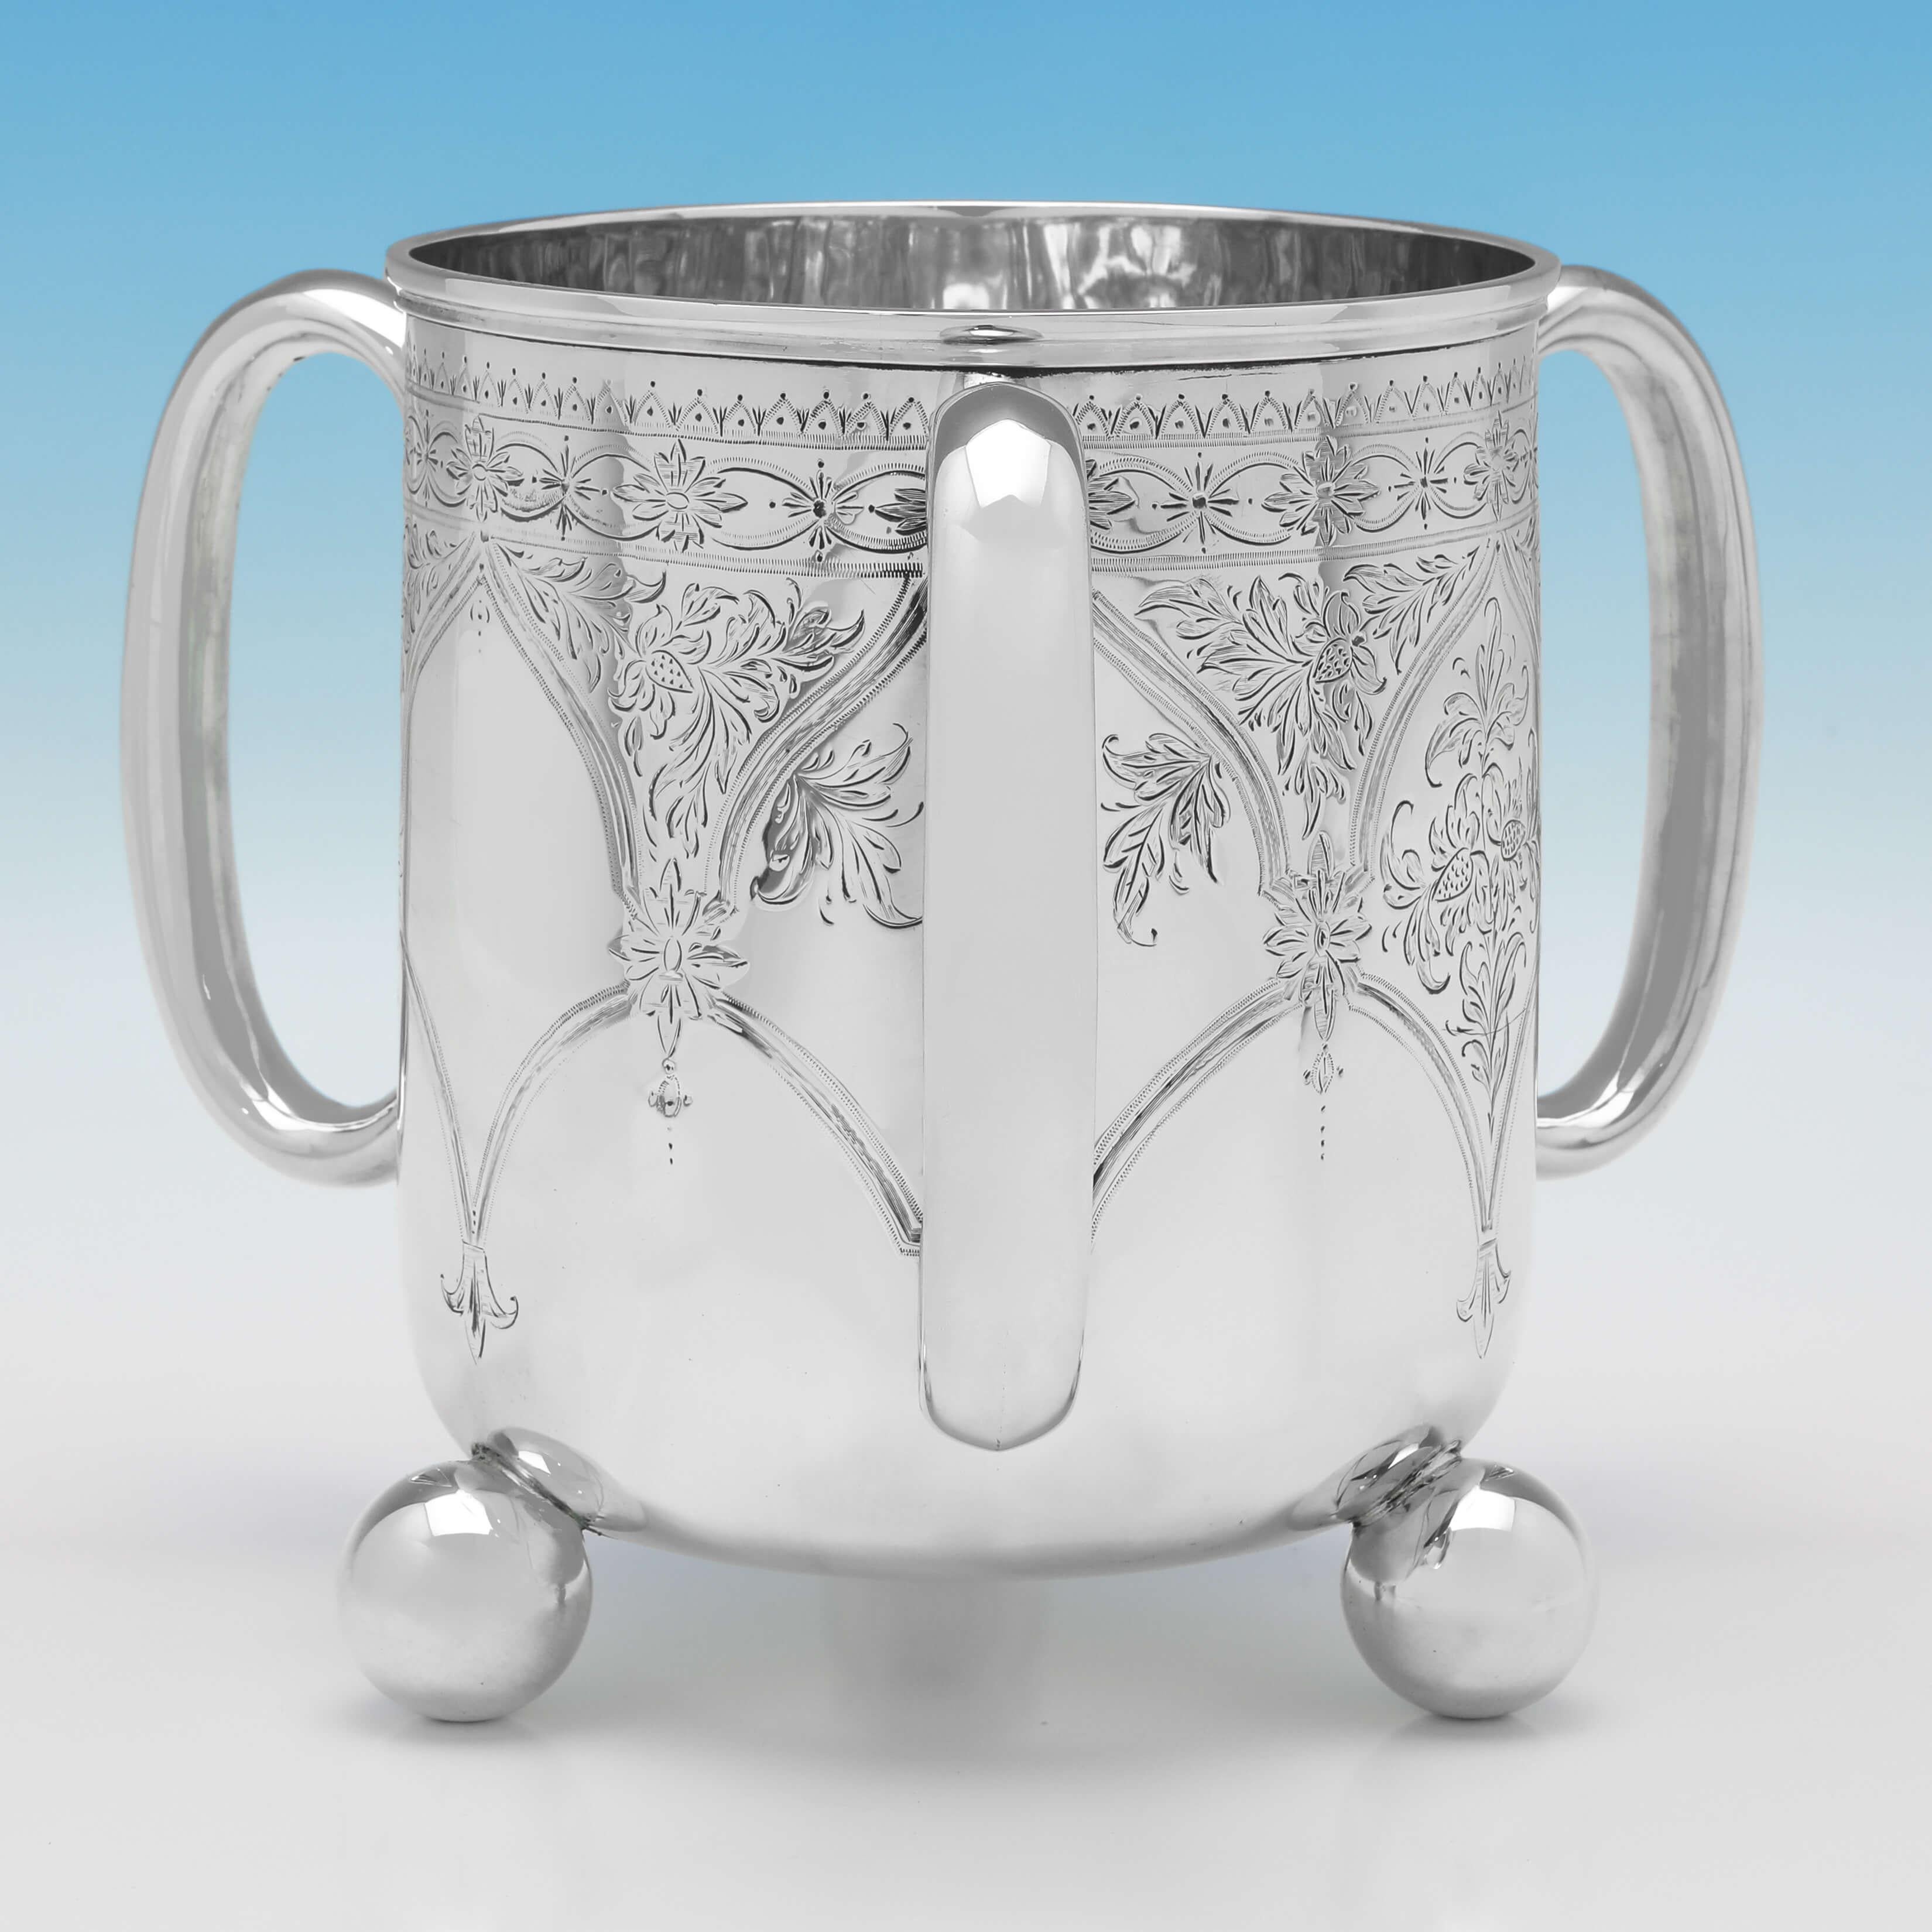 Hallmarked in London in 1881 by Aldwinckle & Slater, this striking, Victorian, antique sterling silver cup, features 3 handles, engraved decoration to the body, and stands on three ball feet. 

The cup would make an ideal wine cooler for a single